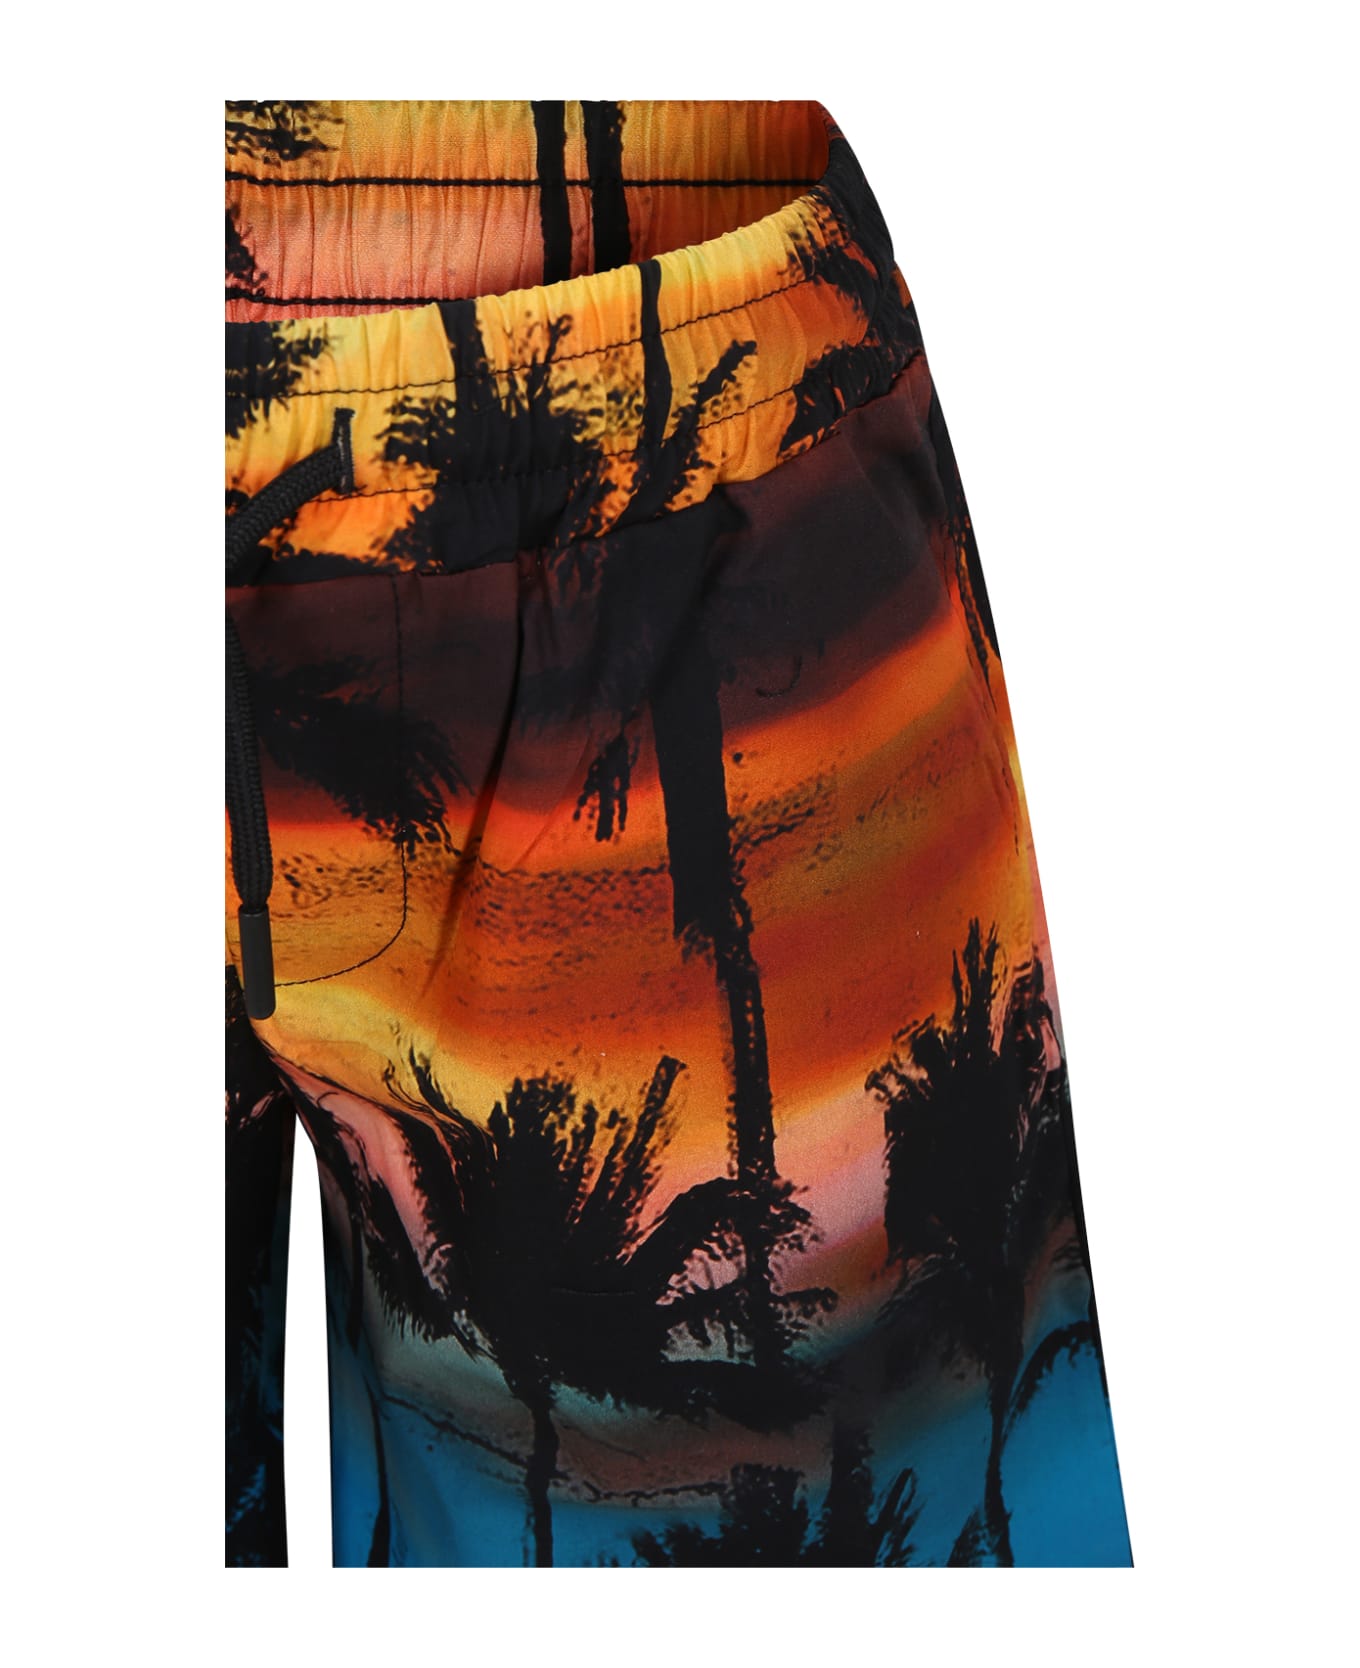 MSGM Orange Shorts For Boy With Palm Tree Print - Multicolor